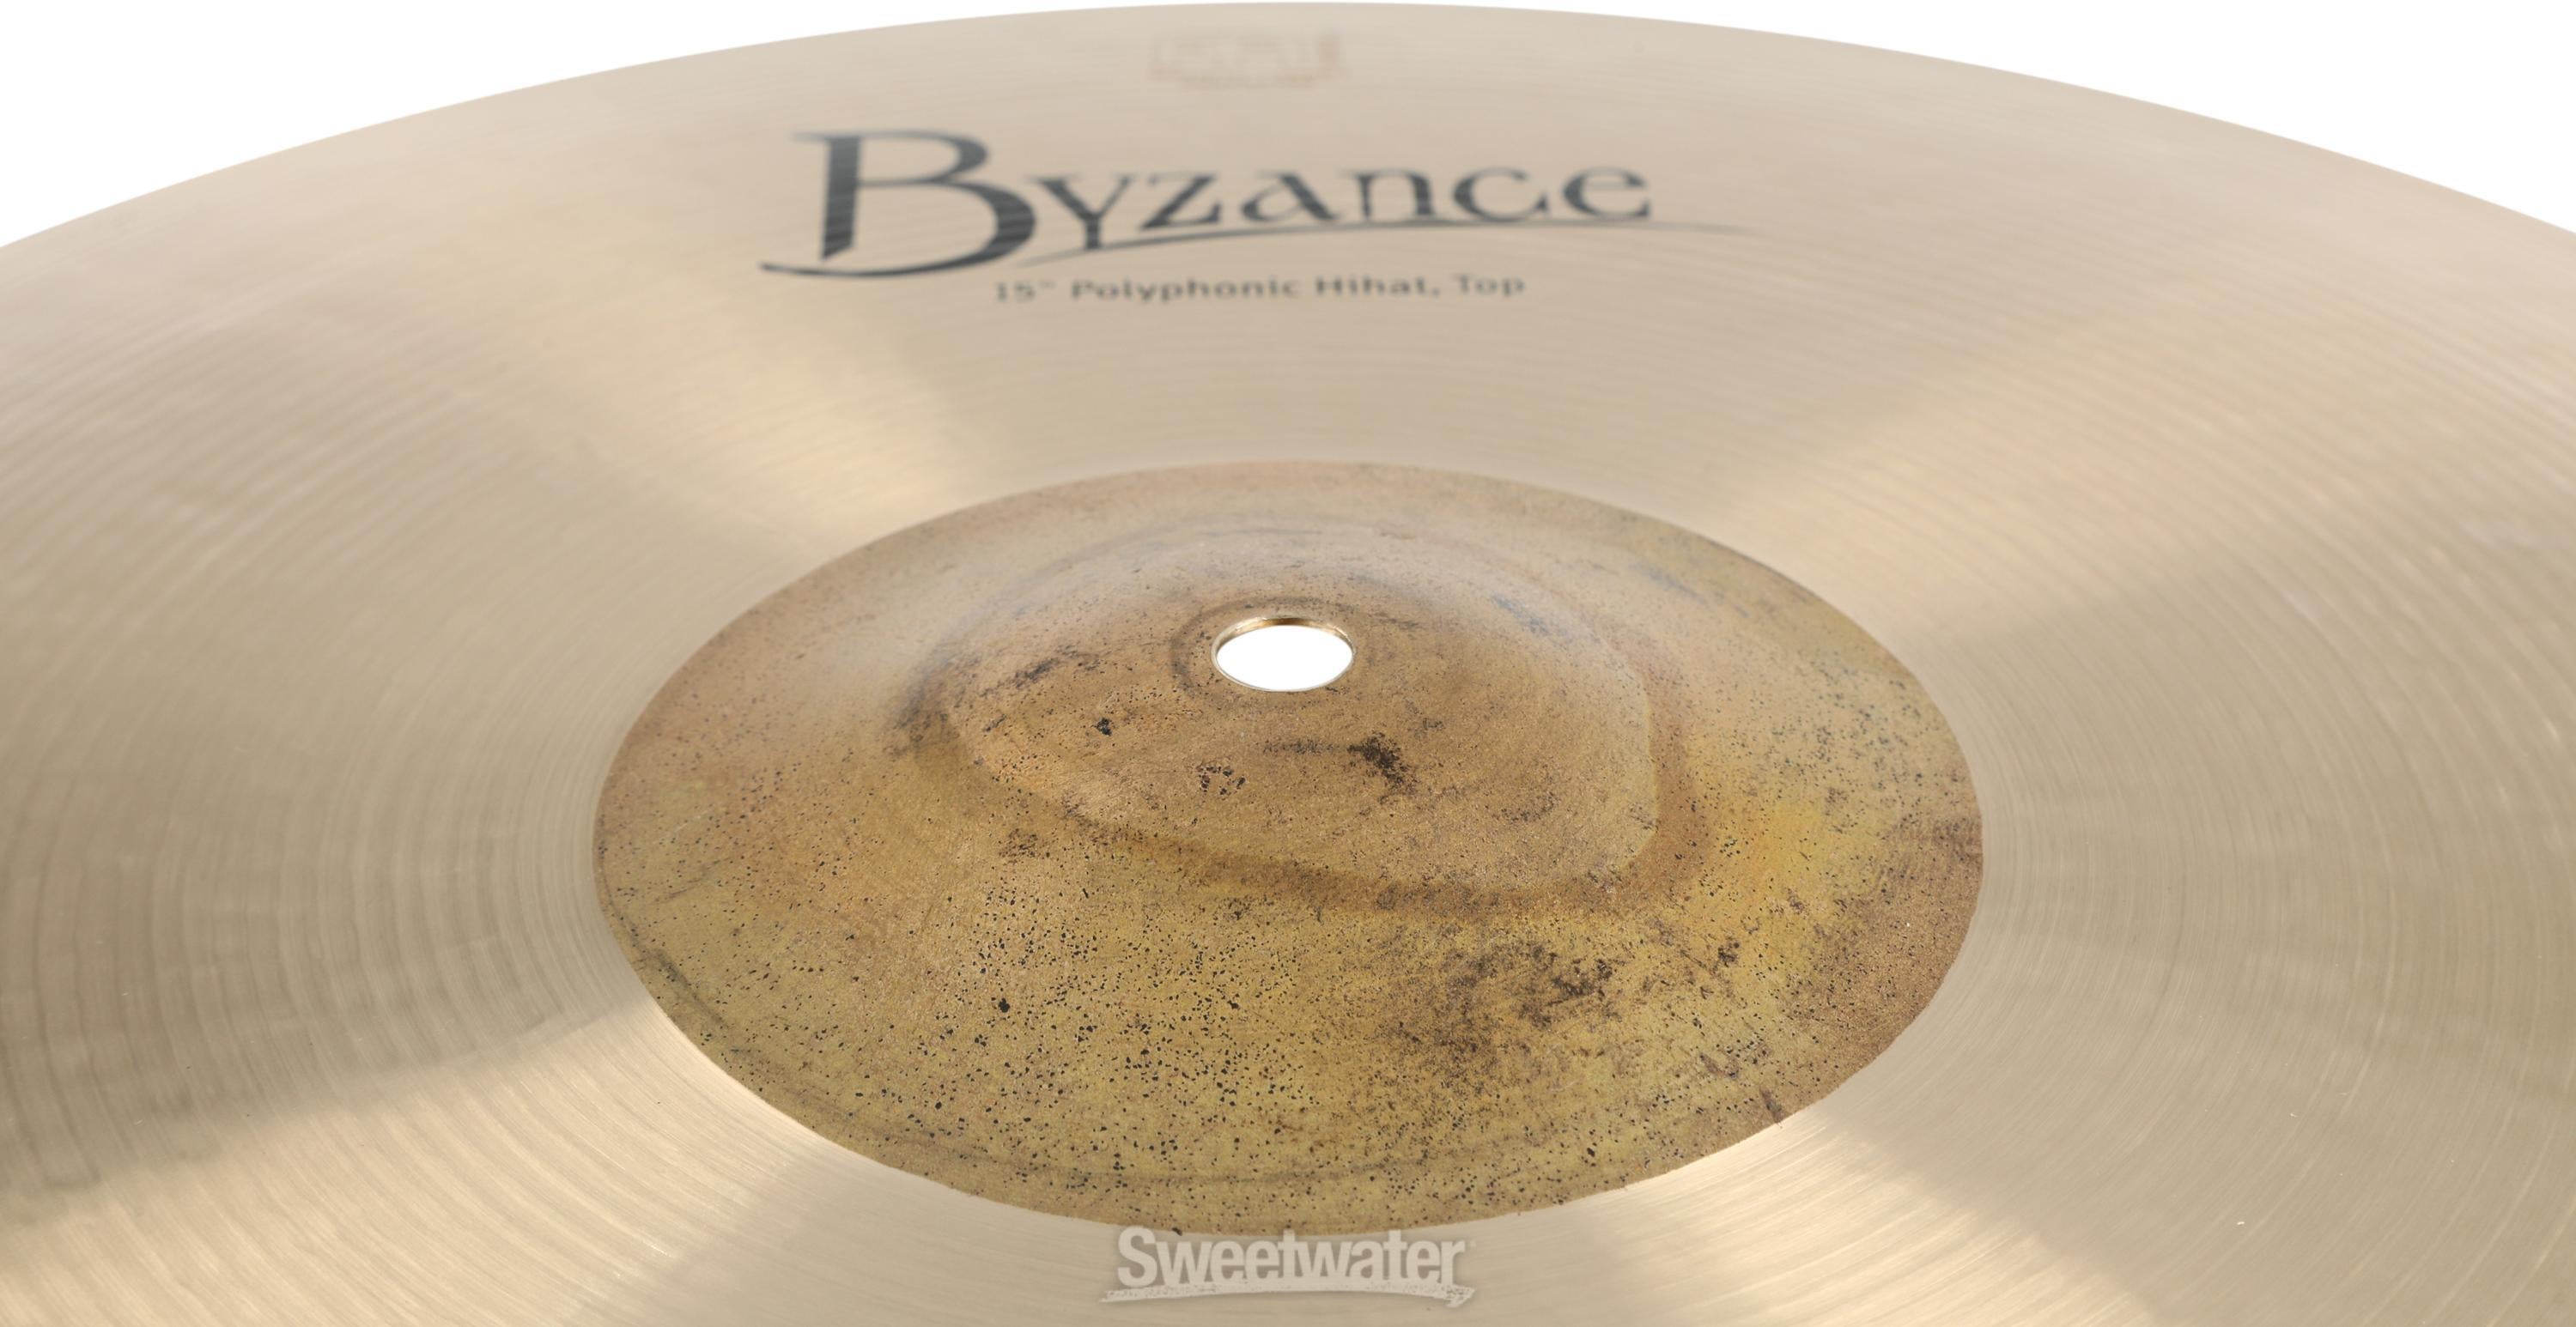 Meinl Cymbals Byzance Traditional Polyphonic Hi-hats - 15-inch